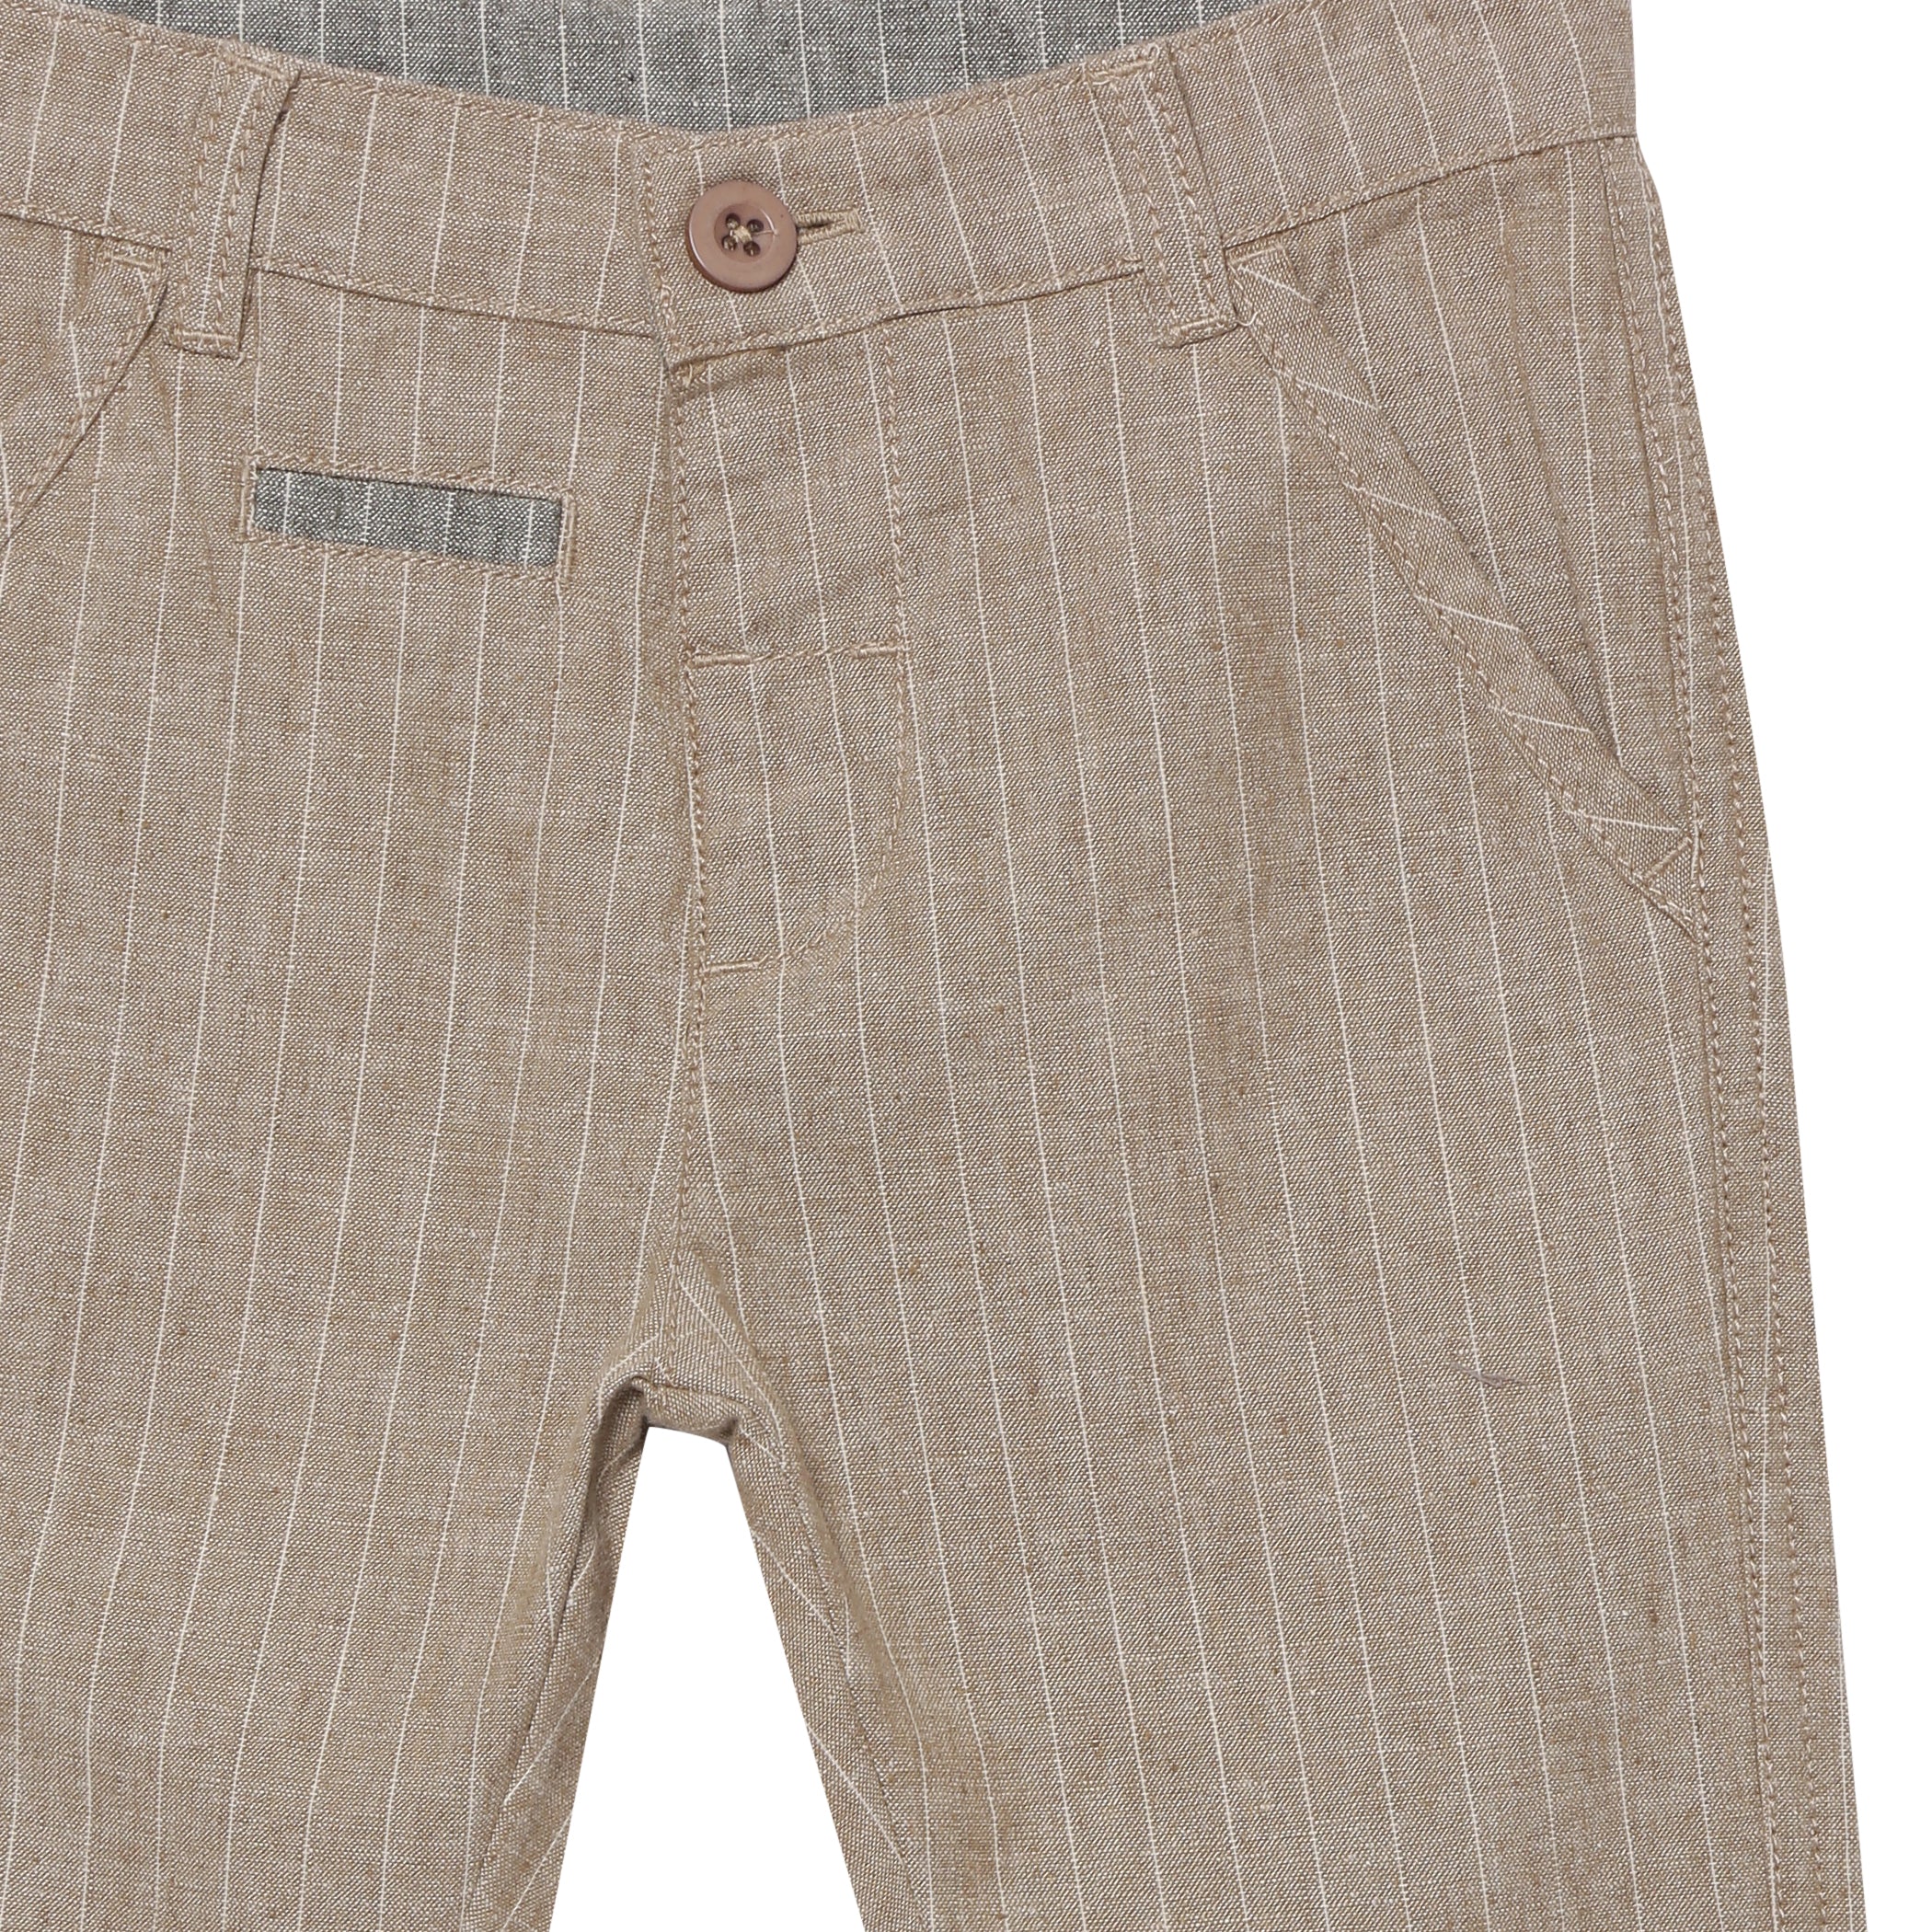 Baby Boys Striped Textured Pant